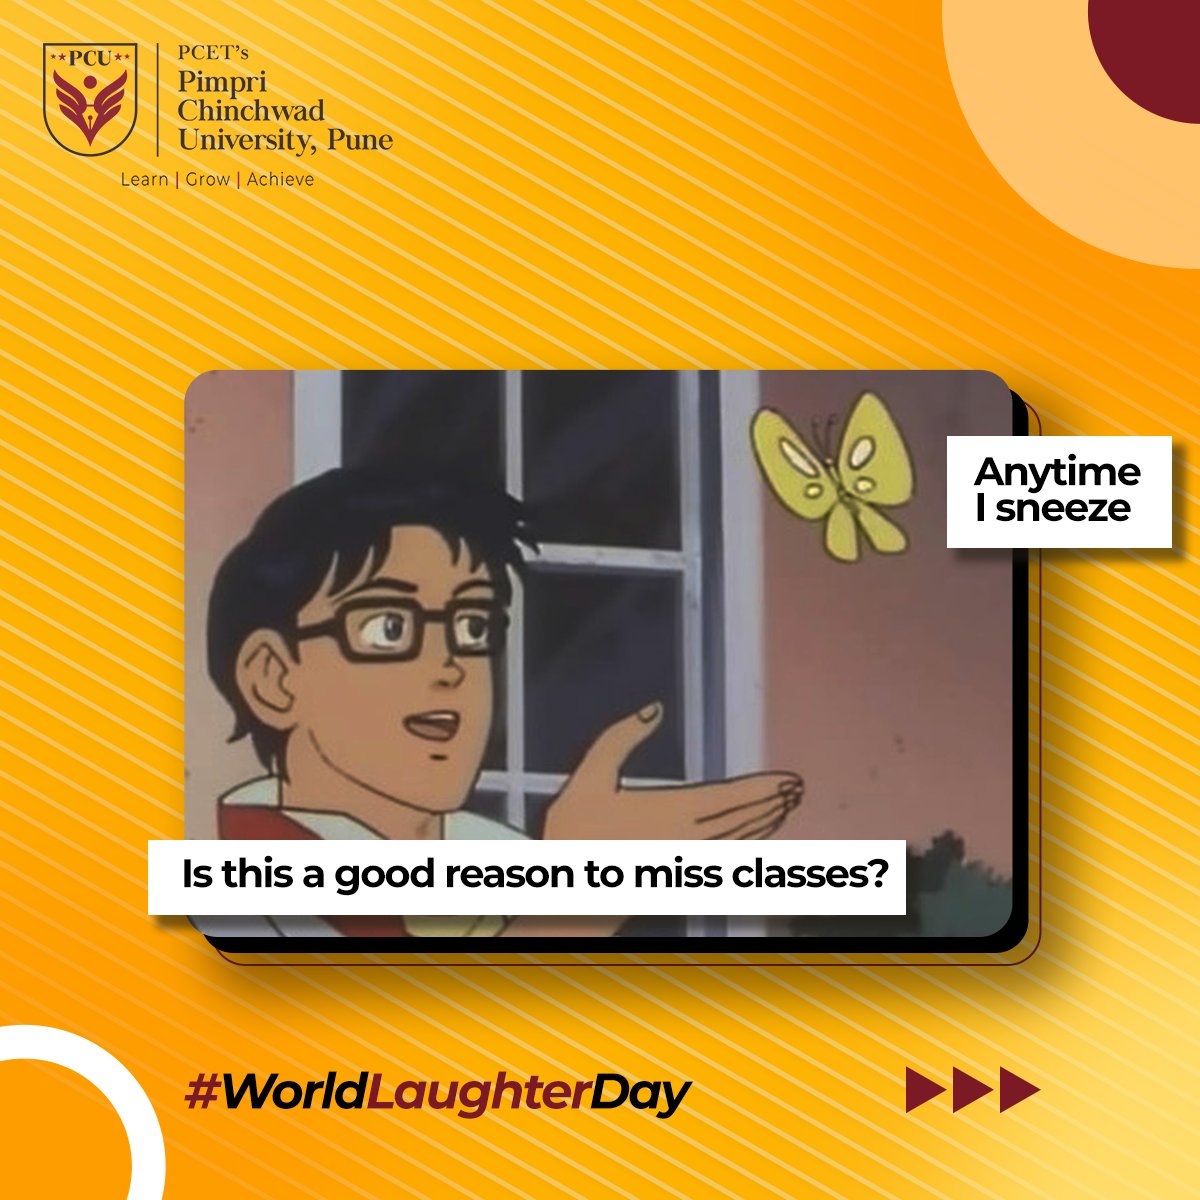 Gear up for some giggles! Celebrating #LaughterDay with timeless memes that never fail to crack us up.

#PimpriChinchwadUniversity #pcetpcu #pcupune #PCUStudents #Laughterday #laugh #memes #funnybones #laughter